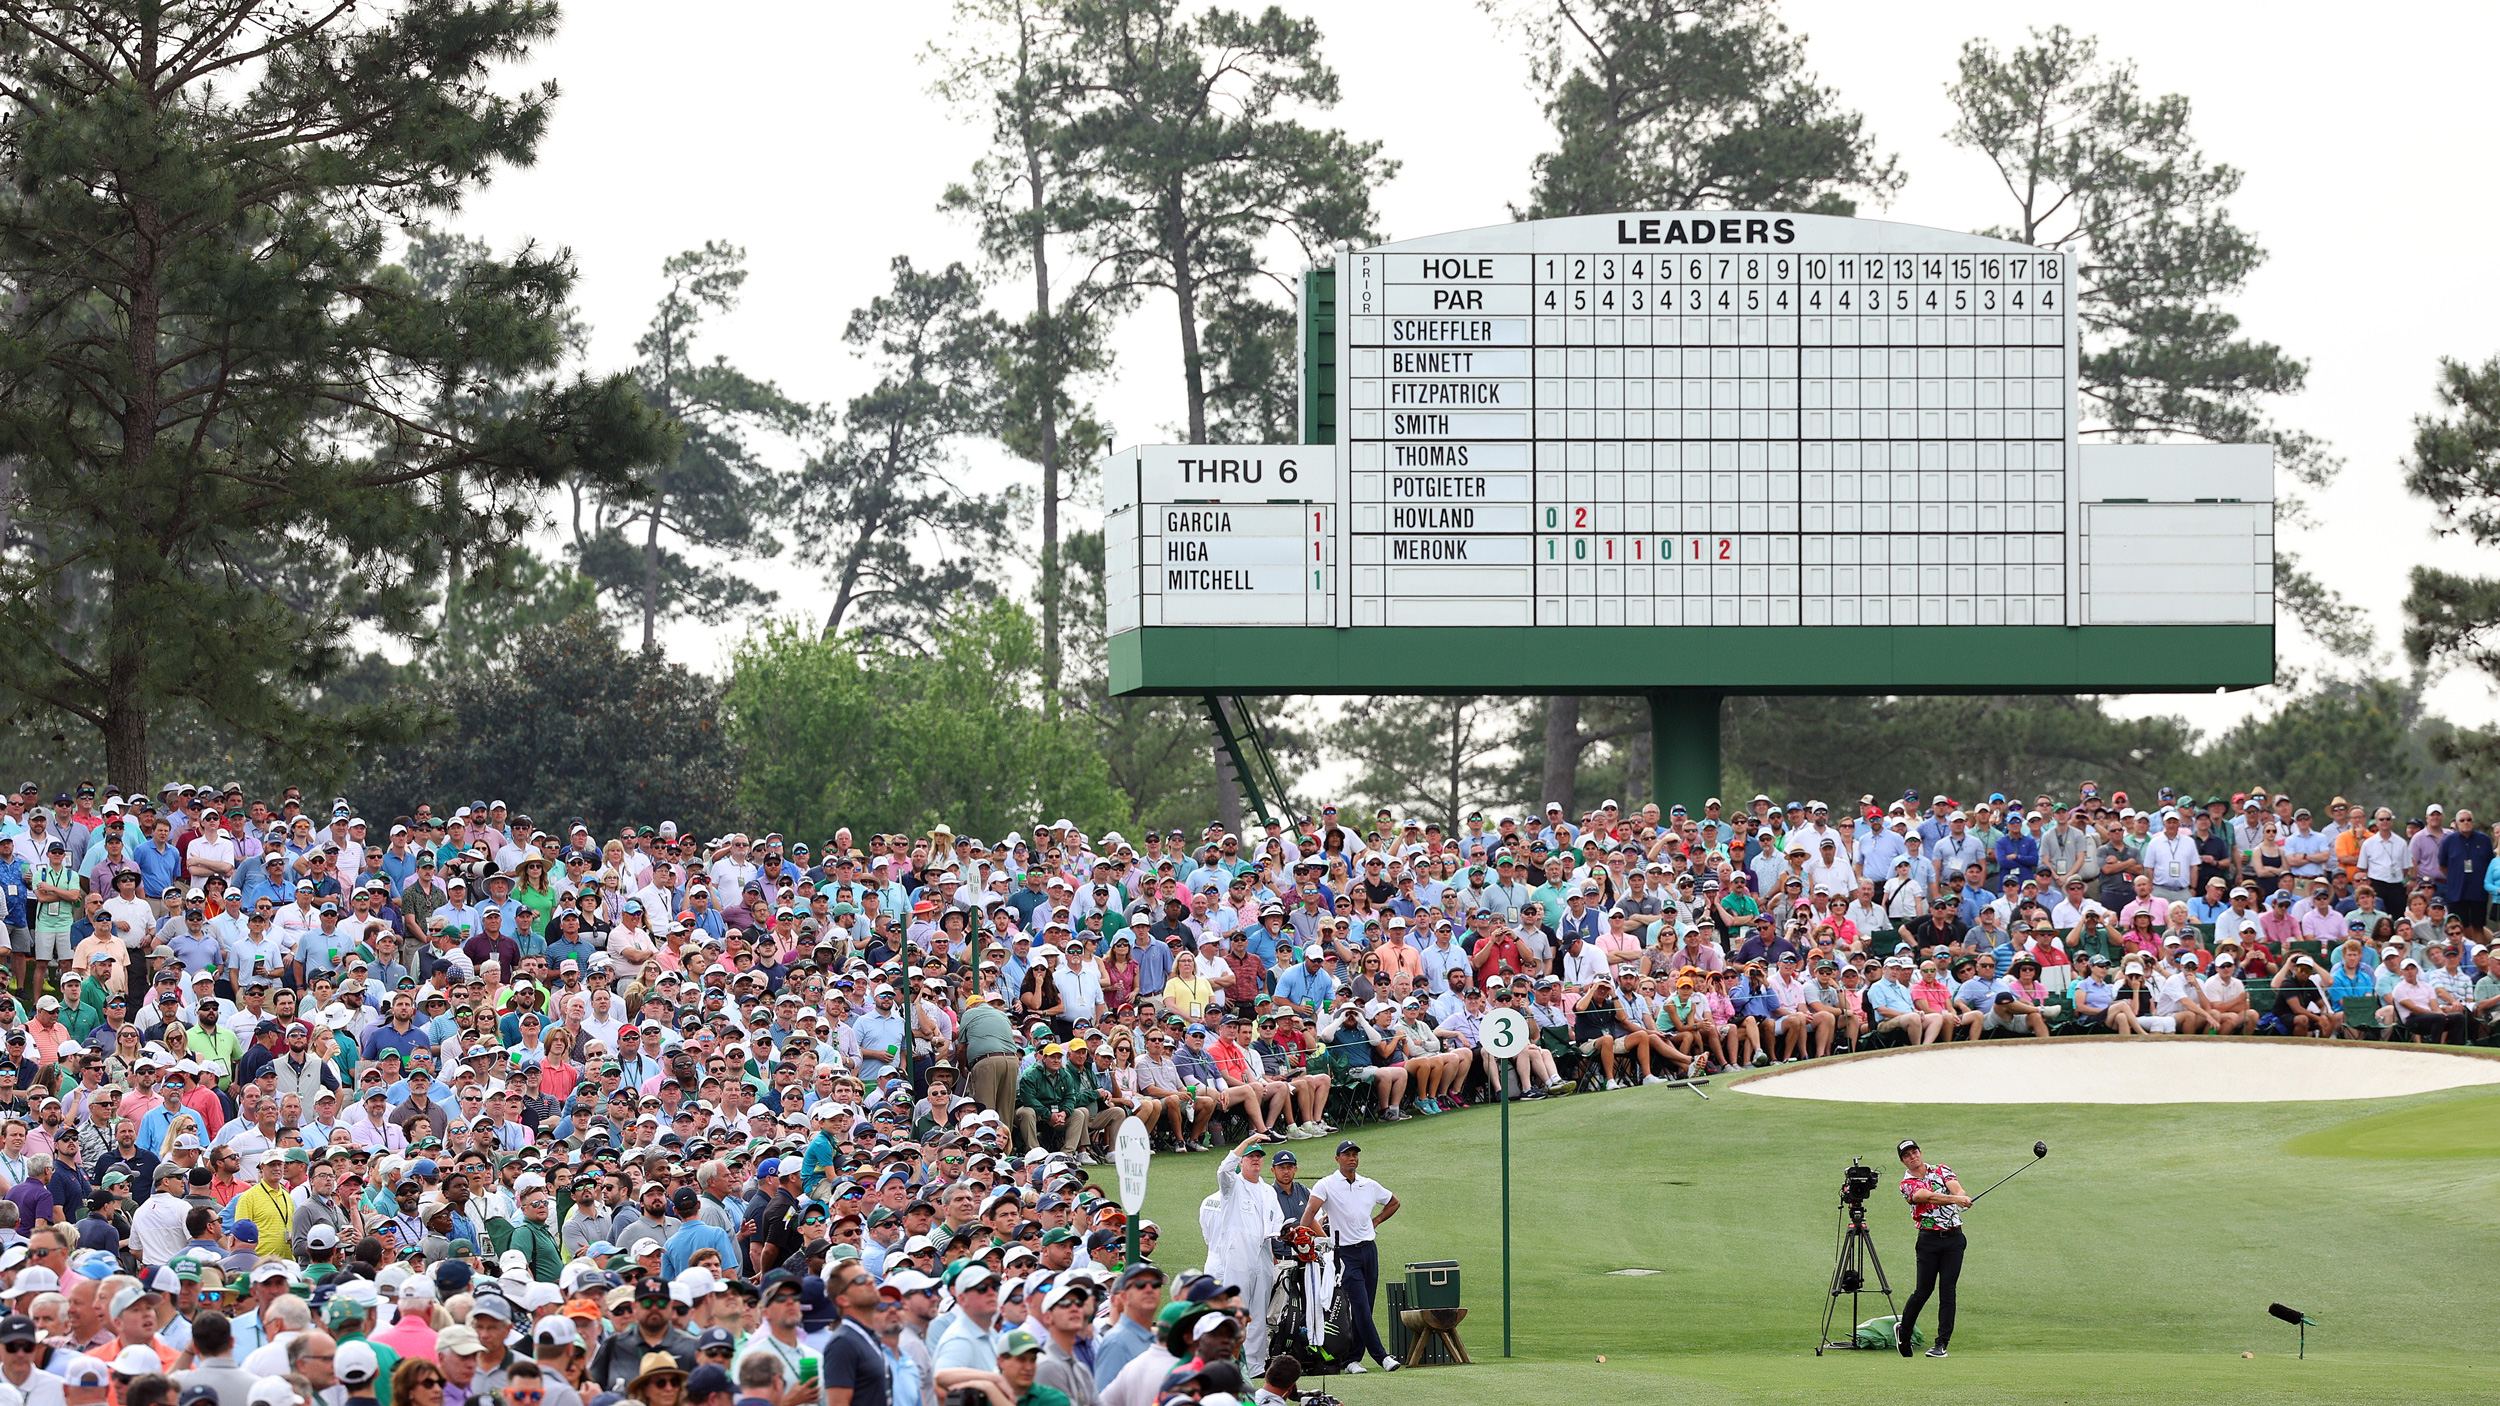 The Masters tee times 2023: When golfers tee off for Round 1 on